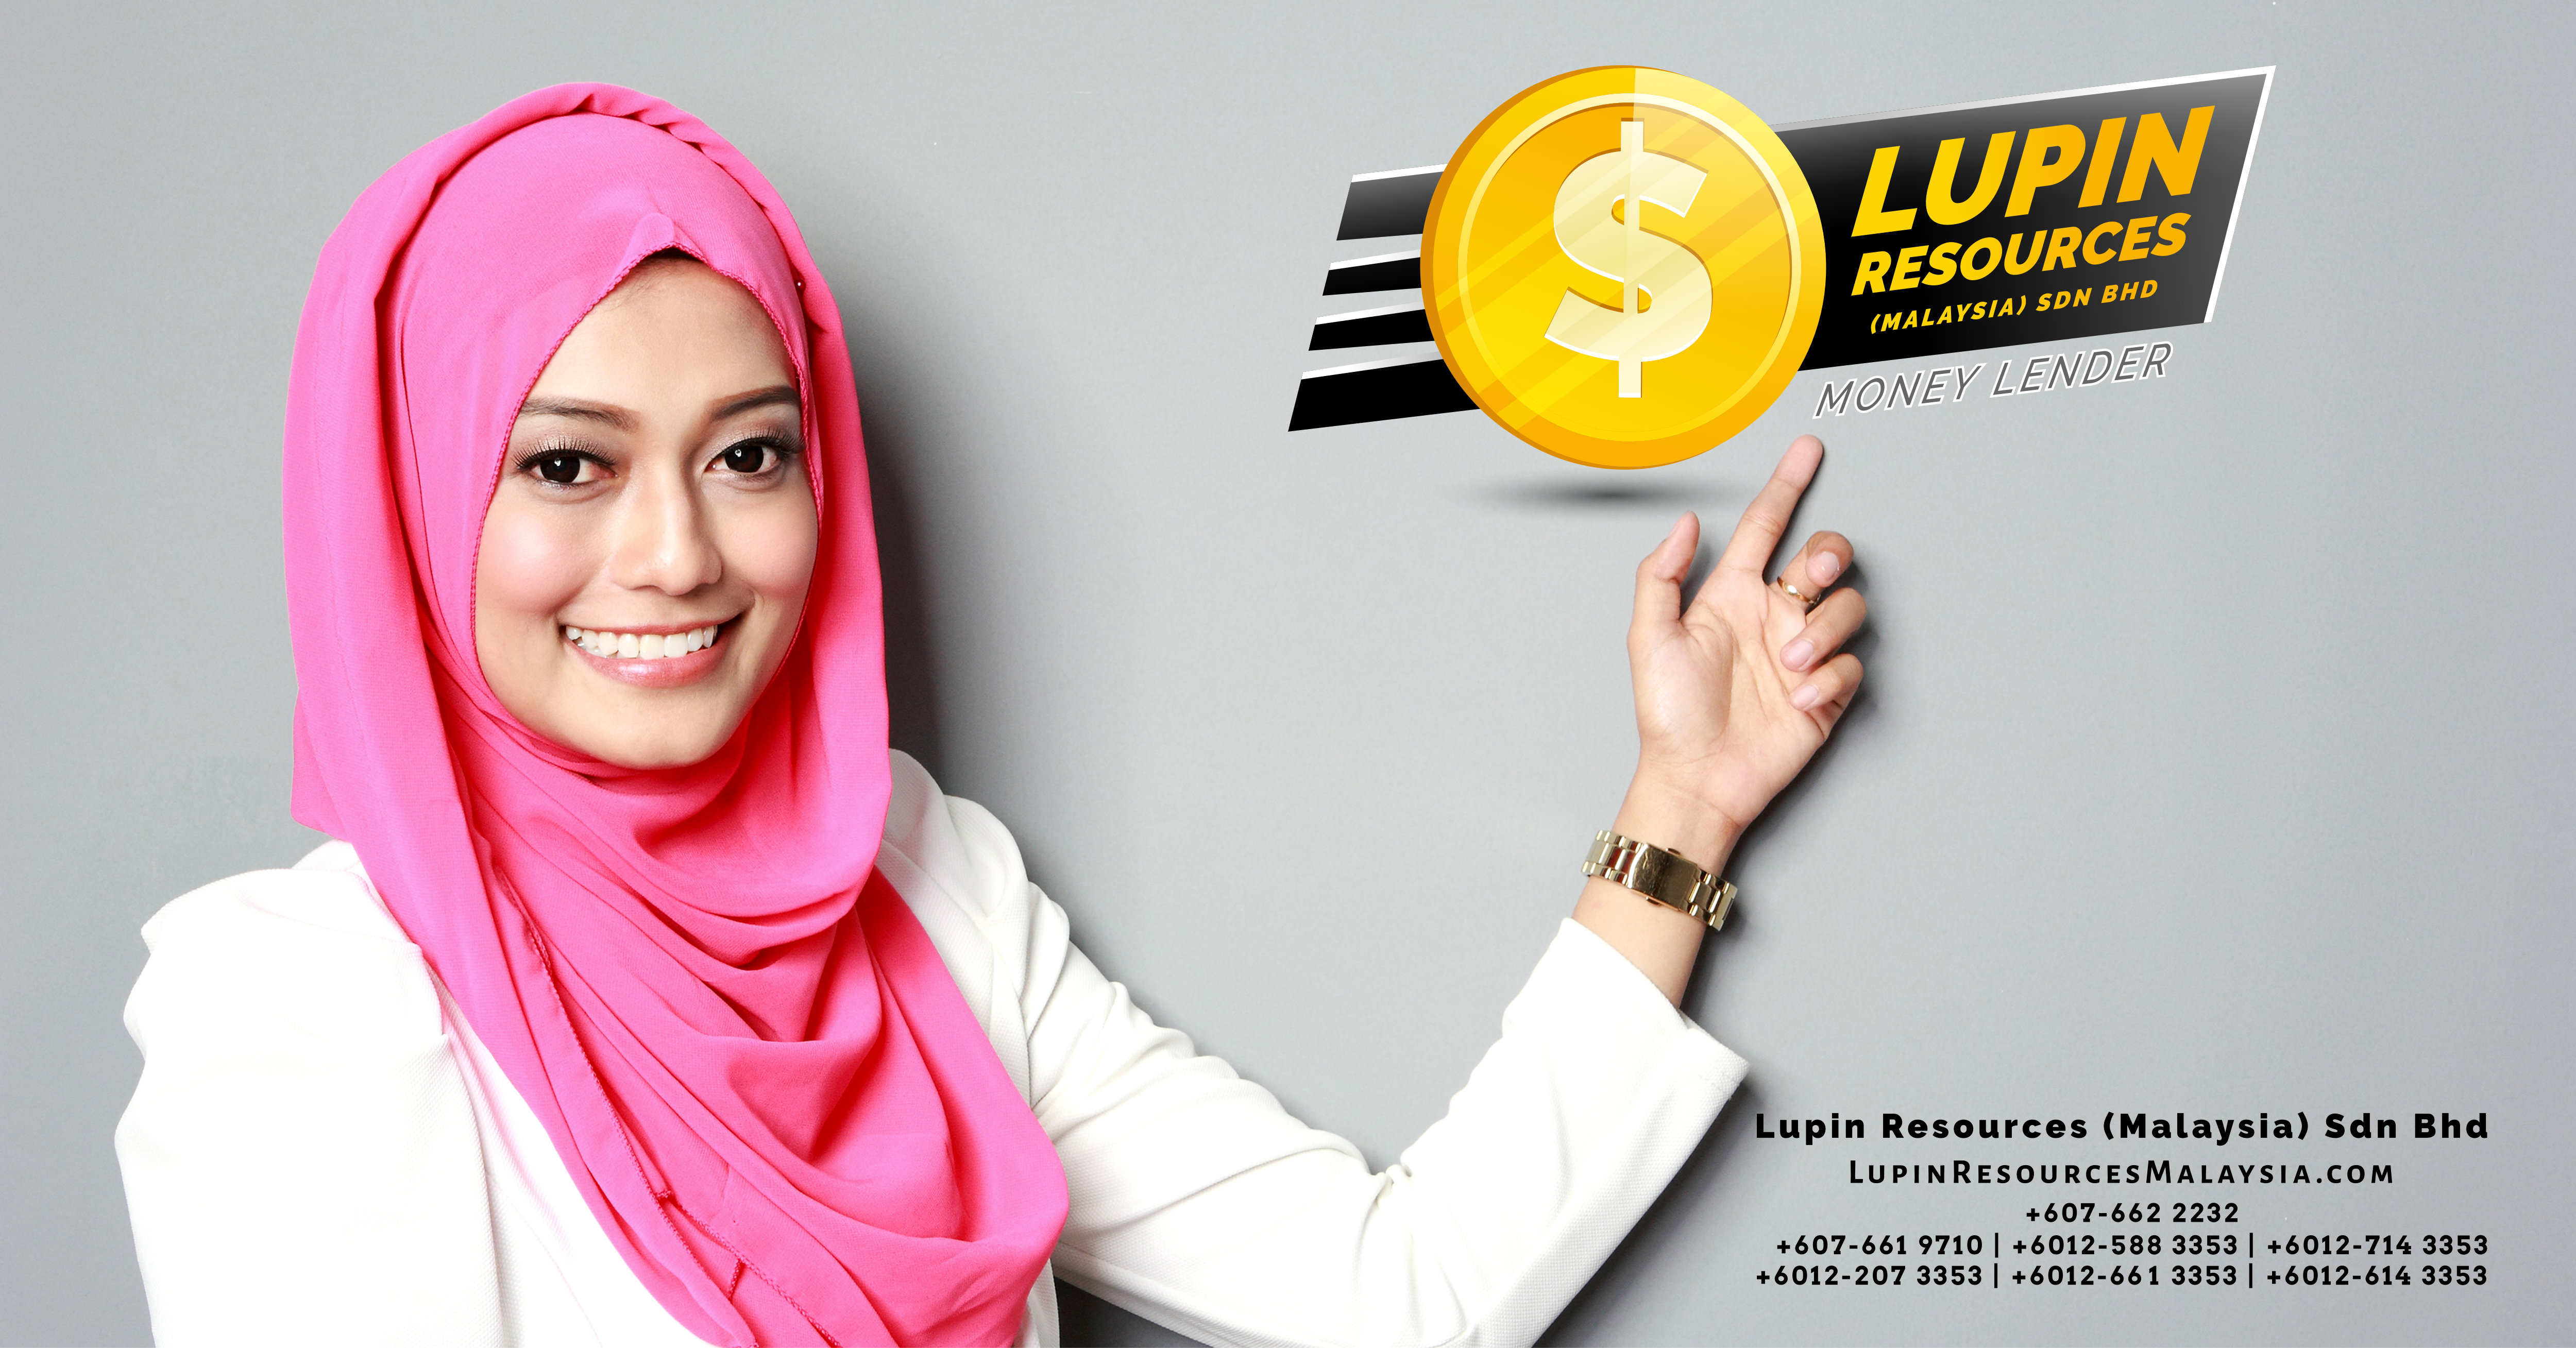 Johor Licensed Loan Company Licensed Money Lender Lupin Resources Malaysia SDN BHD Your money resource provider Kulai Johor Bahru Johor Malaysia Business Loan A00-02